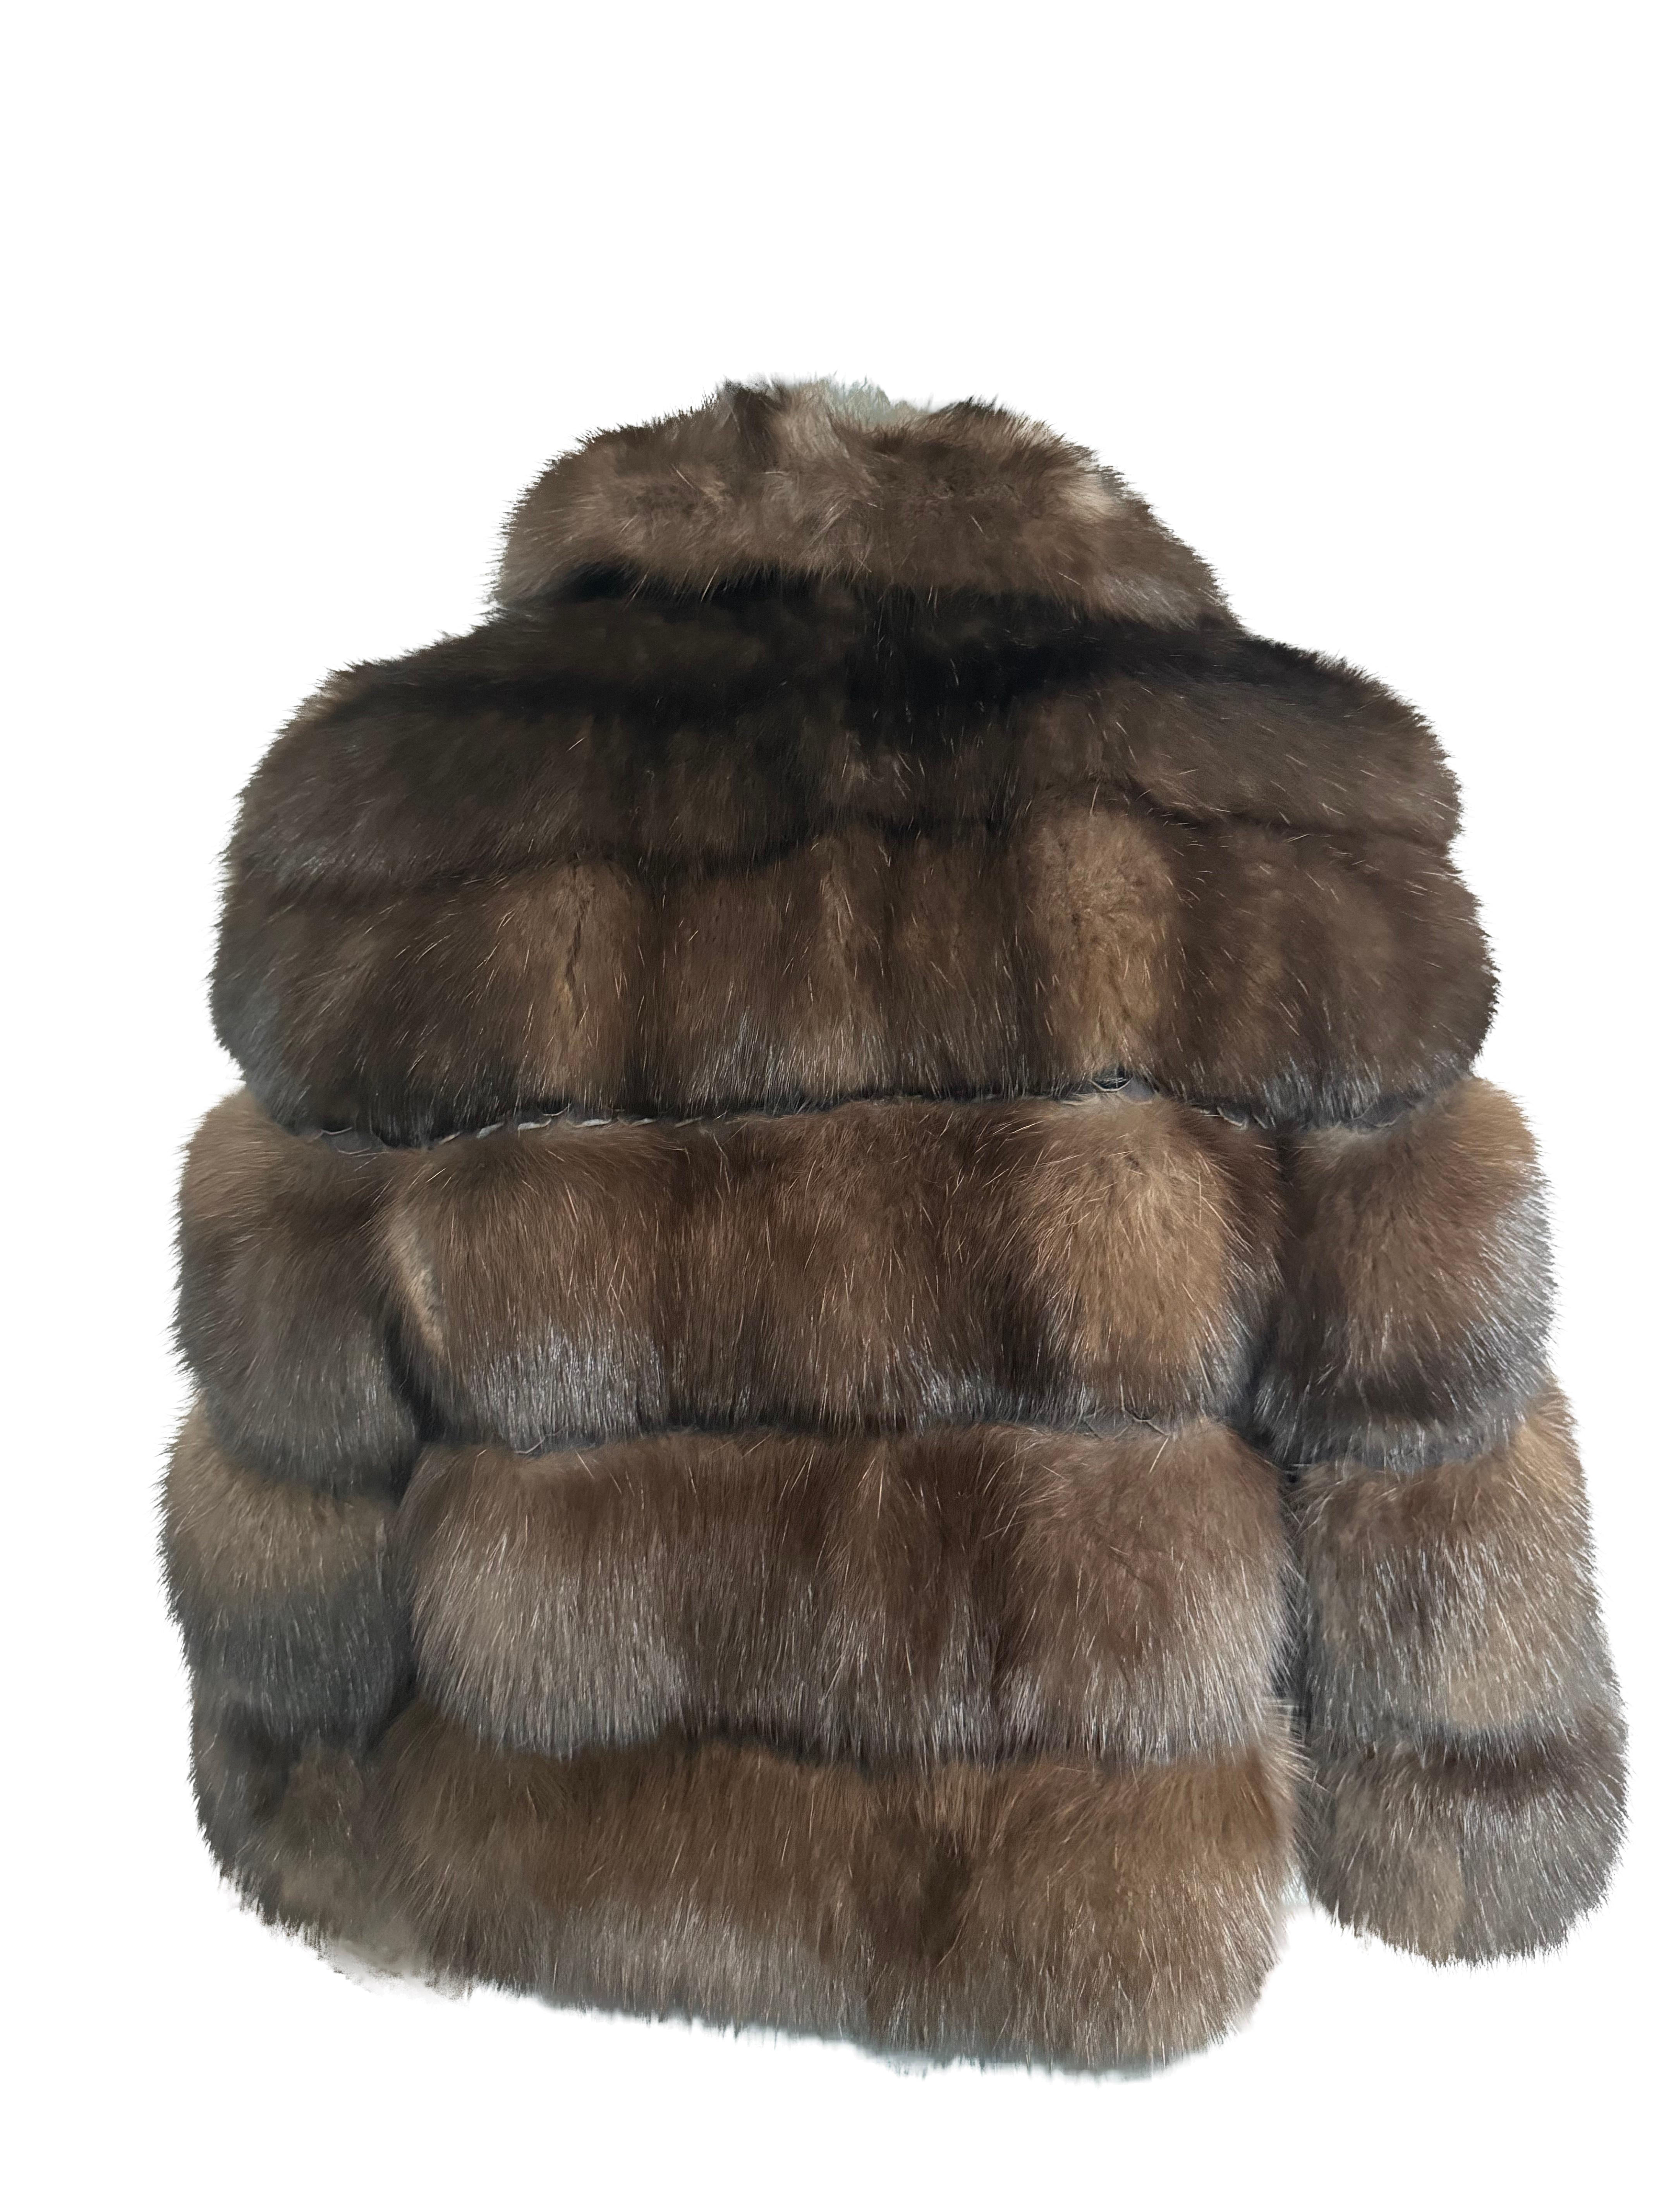 Sable Coat  For Sale 1